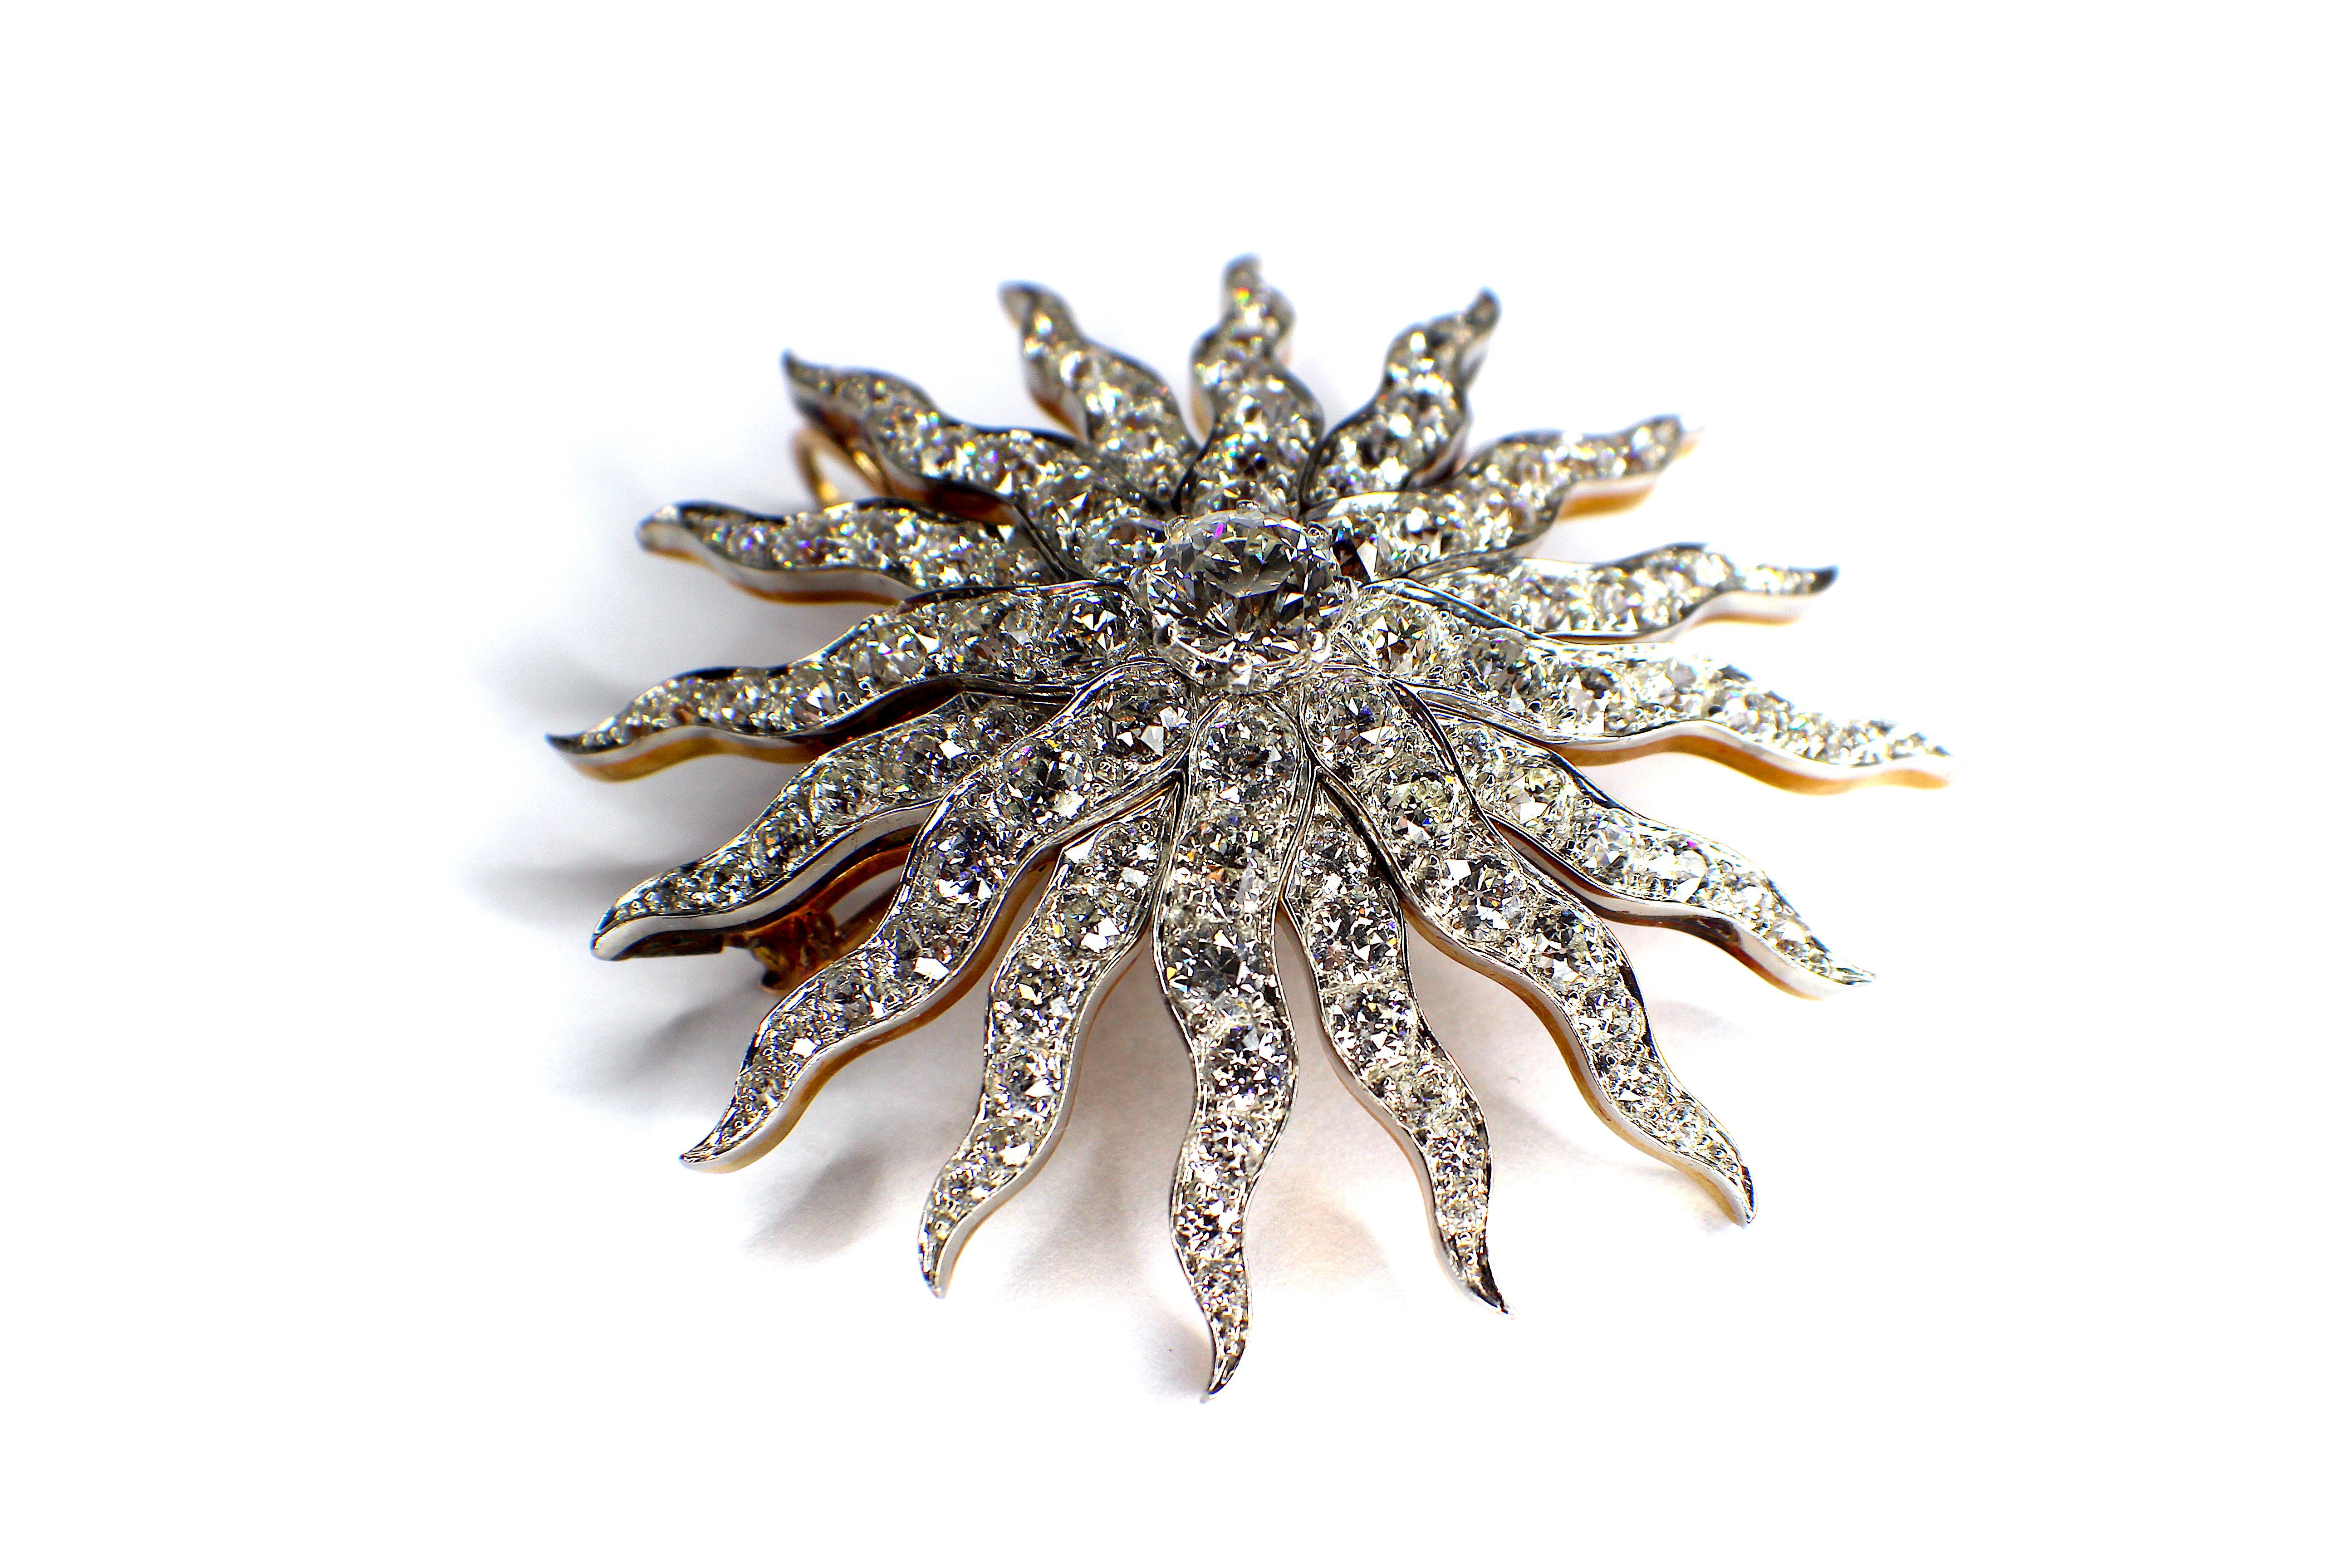 Antique, Sun, Brooch, set with Old Cut Diamonds, 1890-1900.
Middle old European diamond est. 1ct G-I/ Vs, rest of old cut diamonds est. 8.5ct G-J/Vs-si
Very nice matching fine condition.